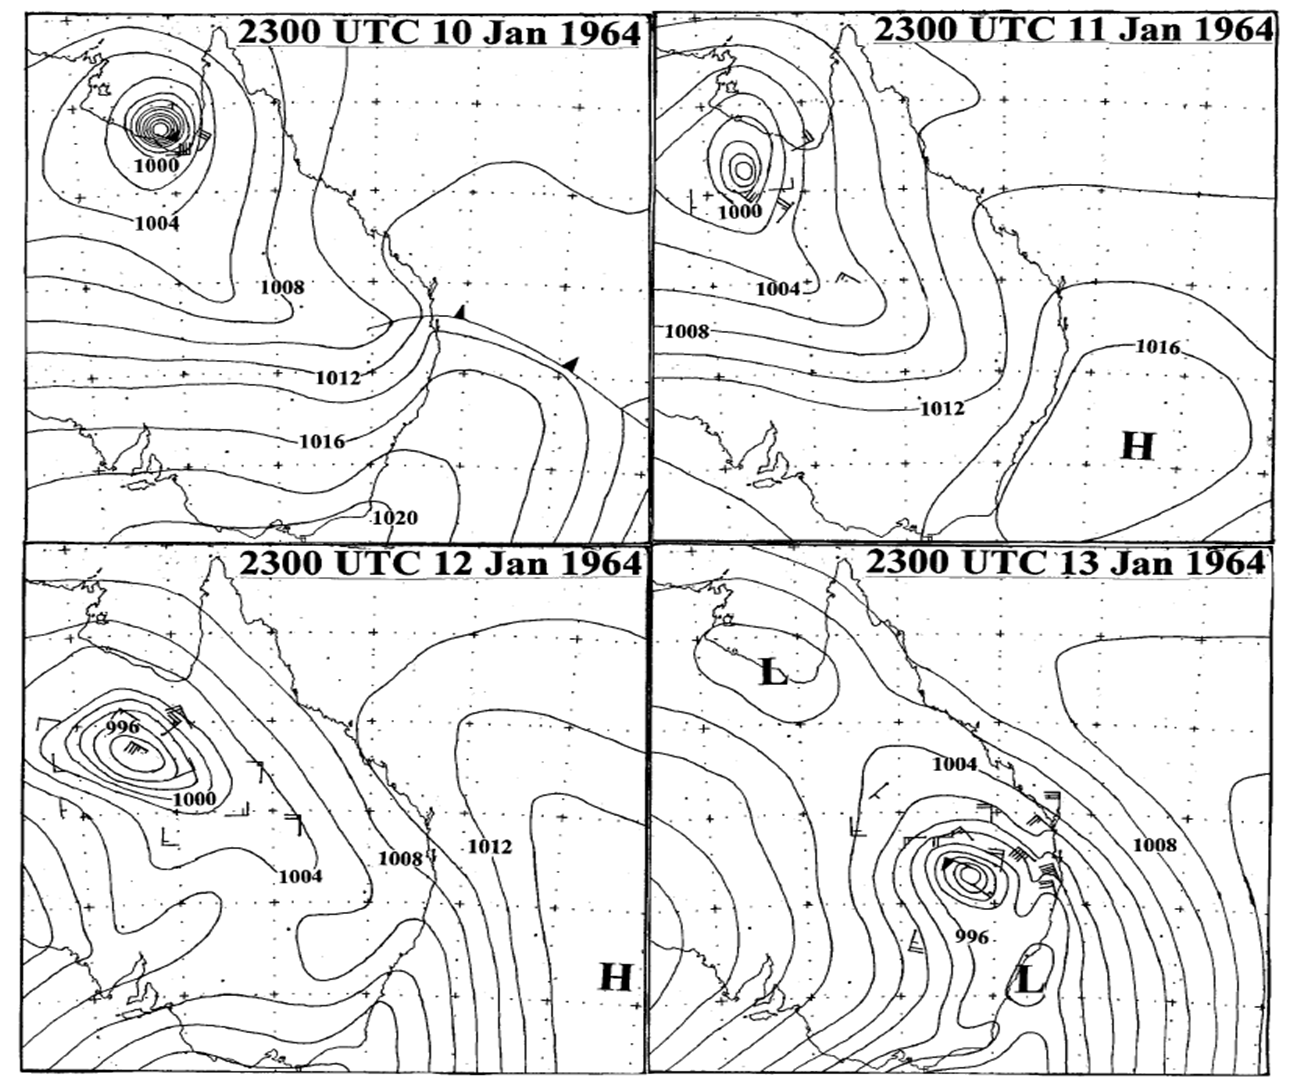 Mean Sea Level analyses of tropical cyclone Audrey as it moved from the Gulf of Carpentaria to northeast New South Wales